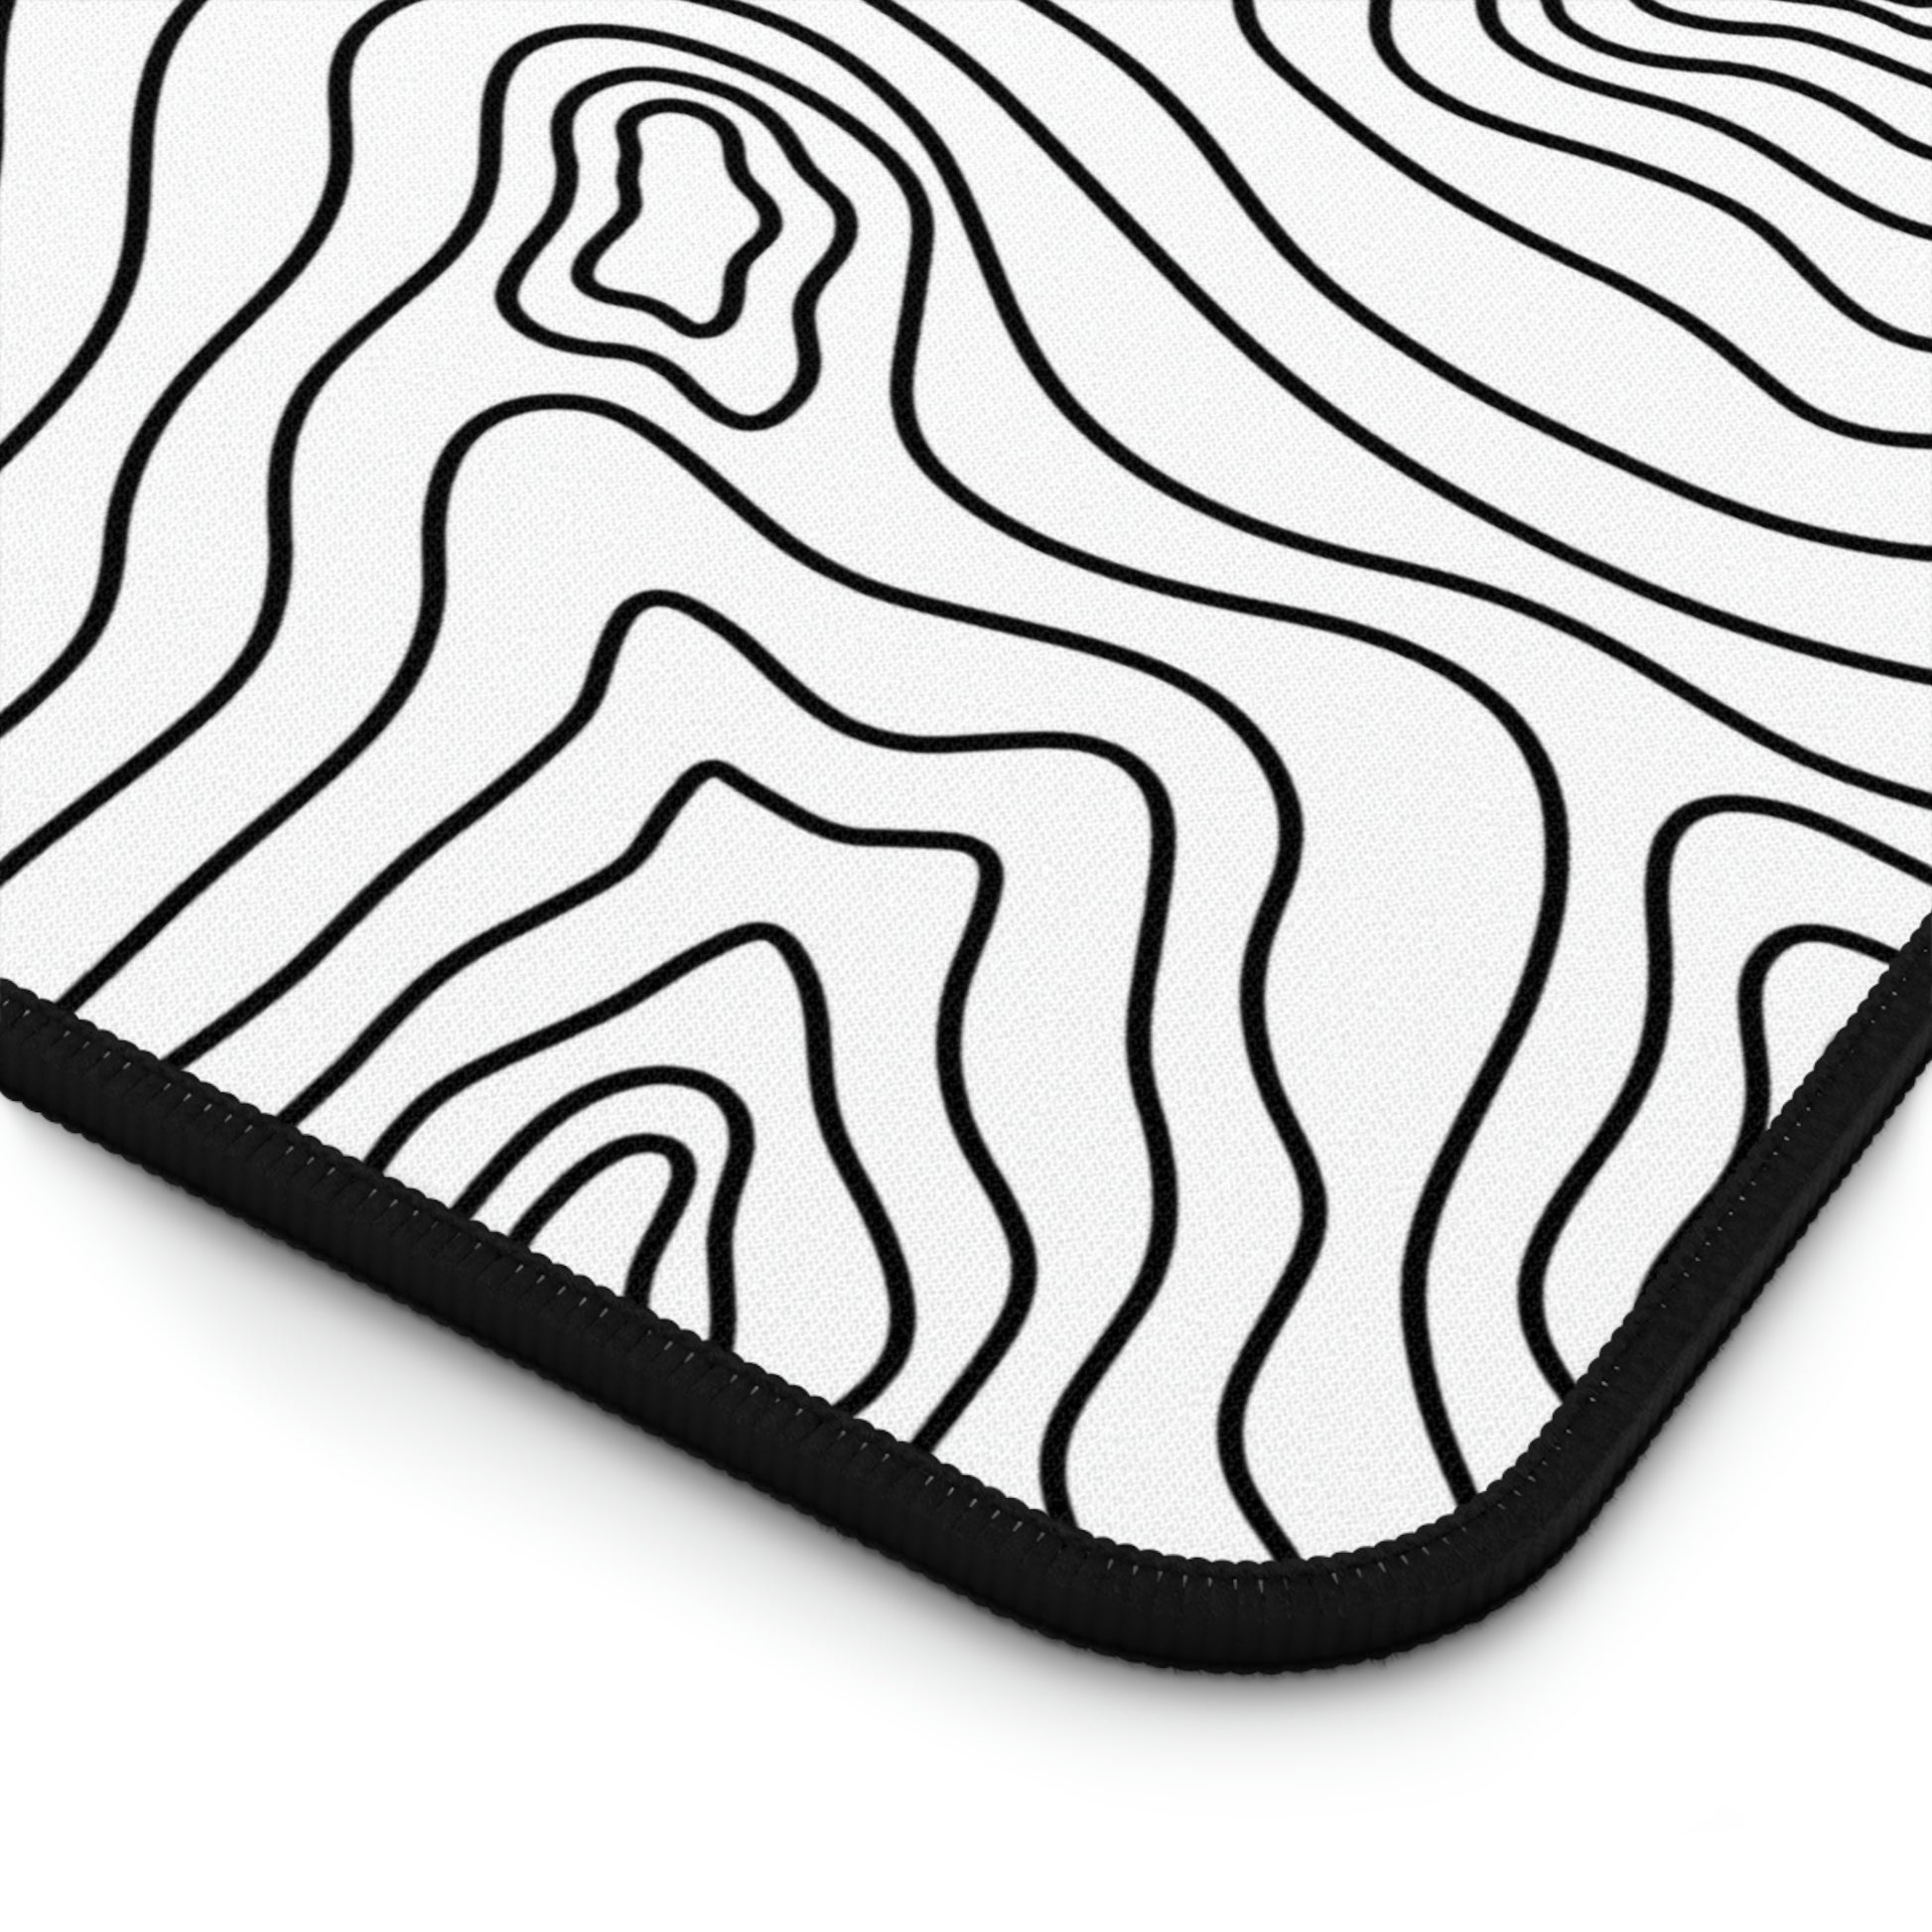 The bottom right corner of a 12" x 18" white desk mat with black topographic lines.